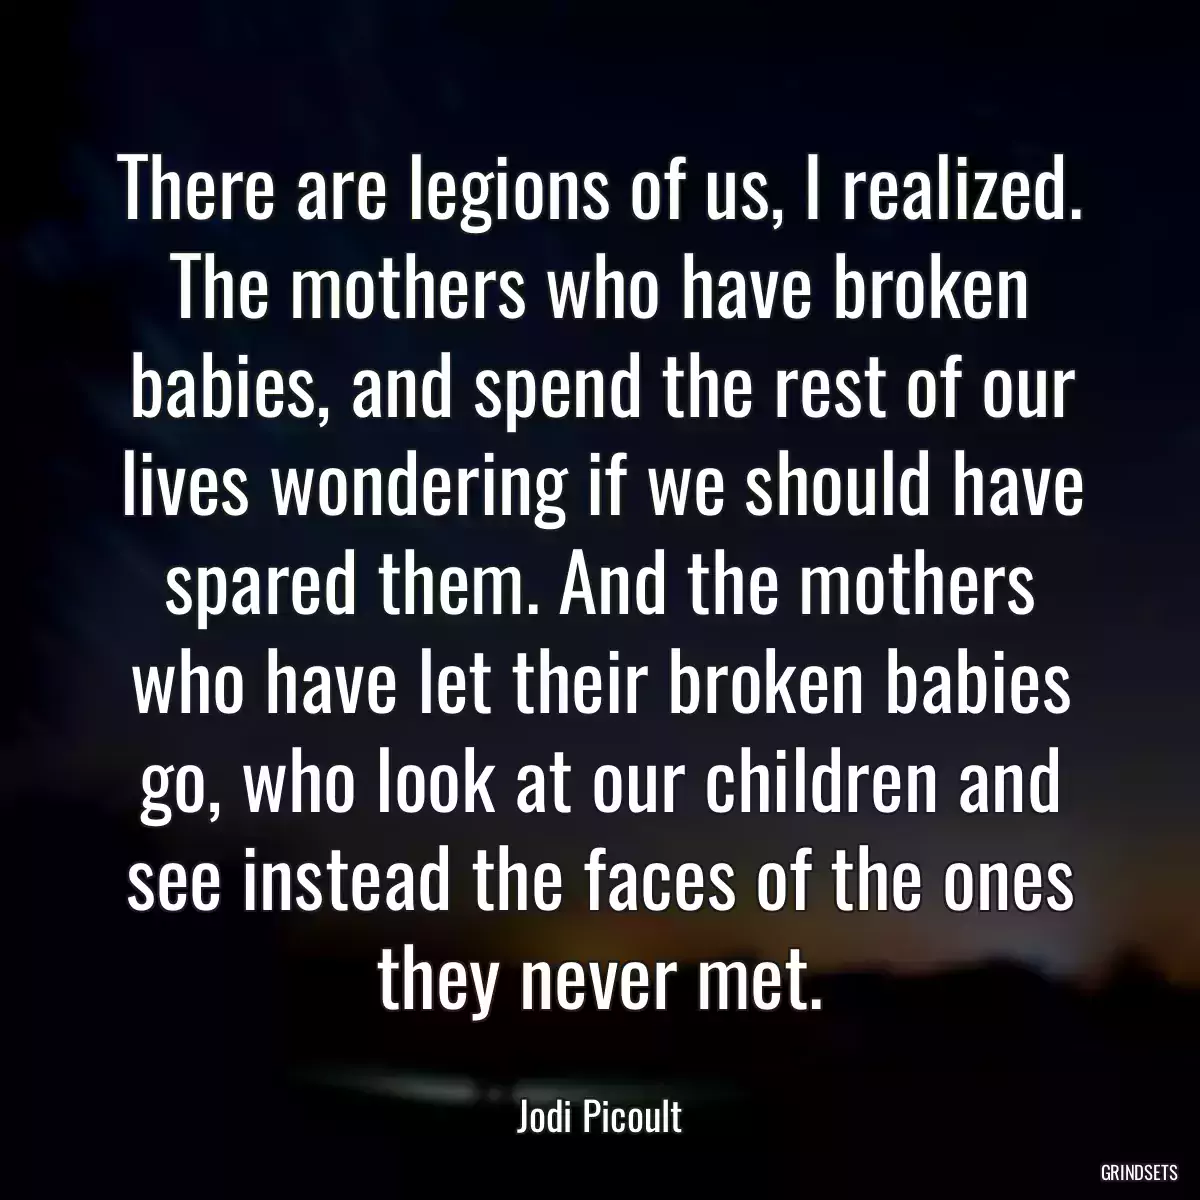 There are legions of us, I realized. The mothers who have broken babies, and spend the rest of our lives wondering if we should have spared them. And the mothers who have let their broken babies go, who look at our children and see instead the faces of the ones they never met.